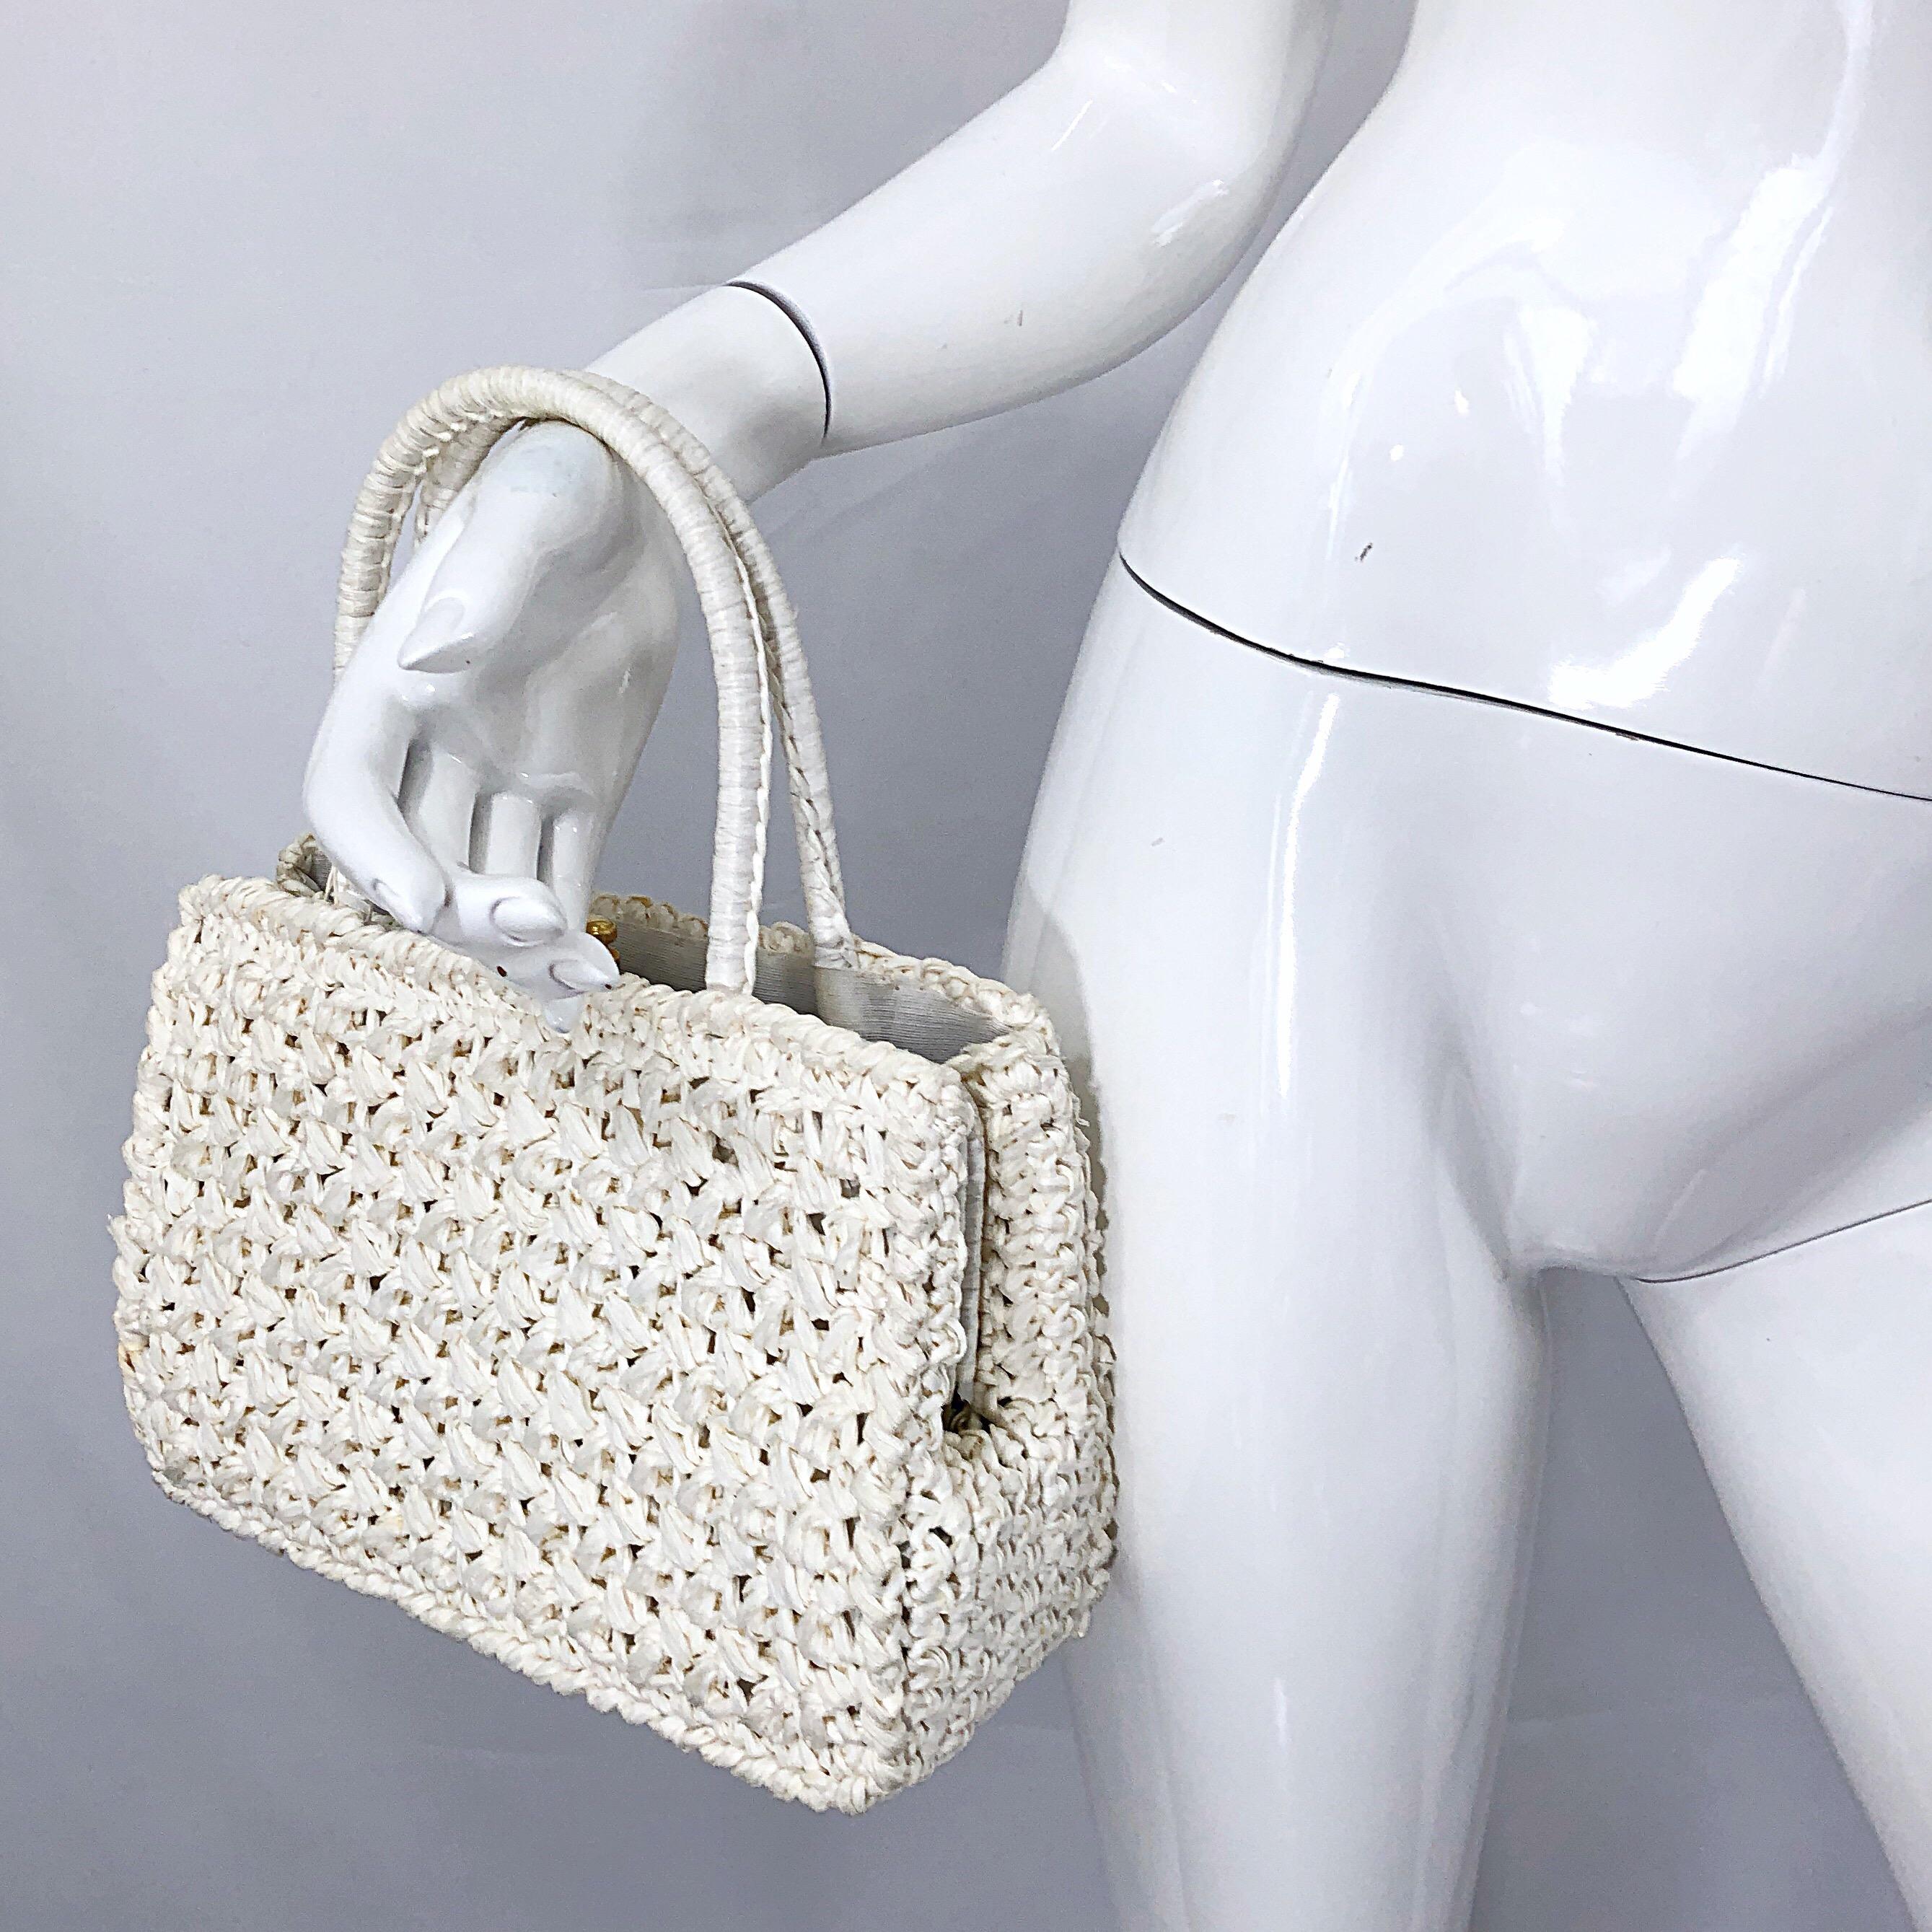 Pretty early 1980s ADORIA Italian Made stark white raffia straw satchel handbag! Features soft white raffia, with secured center pocket that snaps shut. The perfect spring / summer accessory for any outfit. In excellent condition, with not signs of